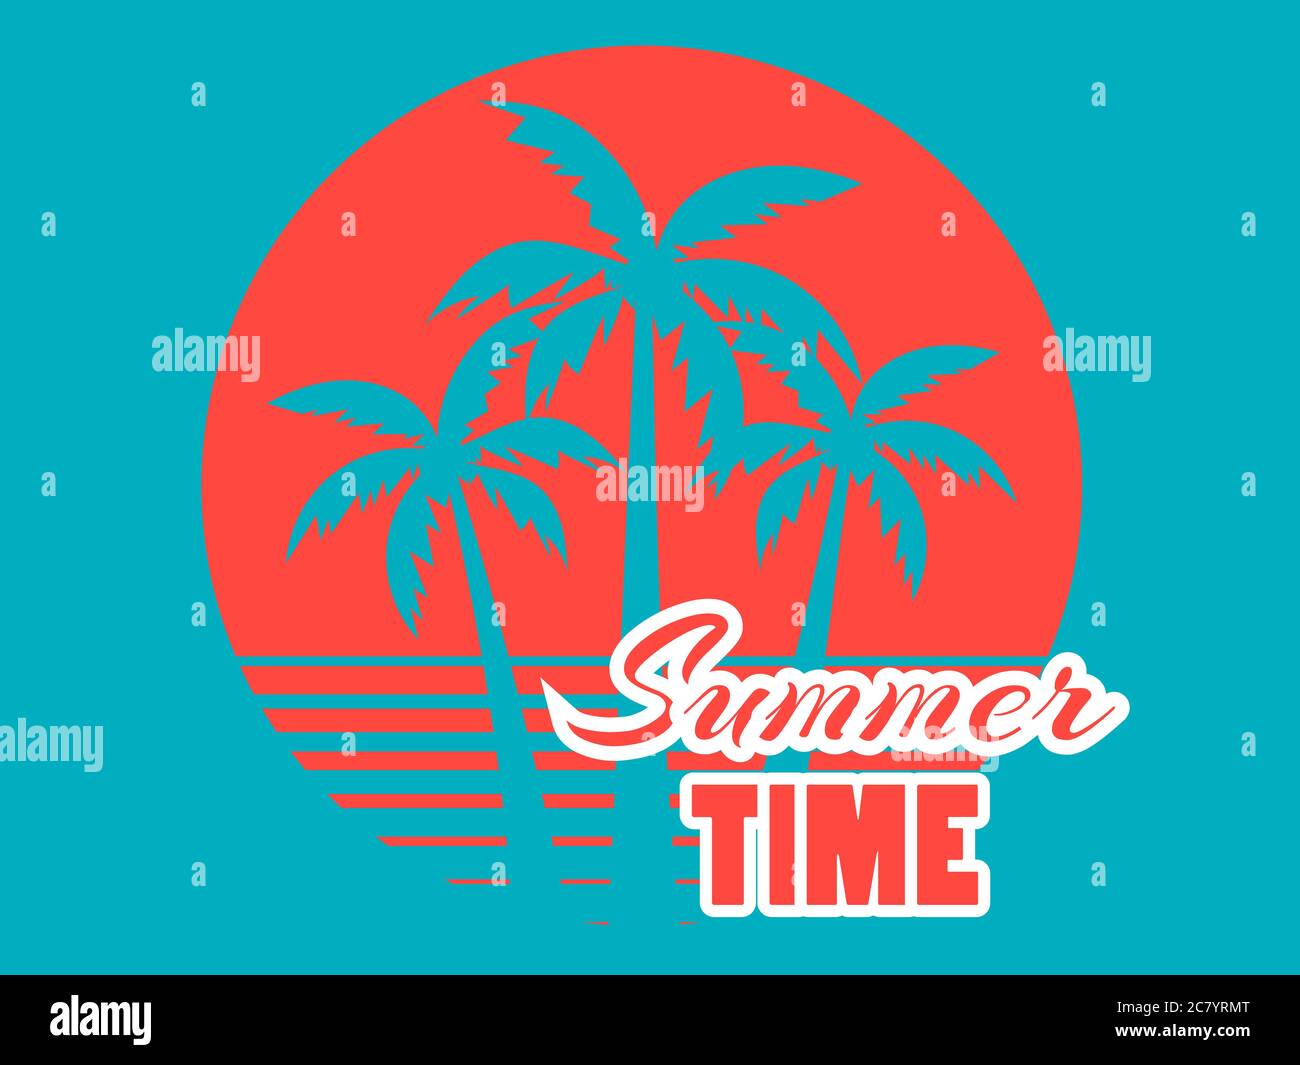 Summer Time 80s Retro Palm Trees On A Sunset Tropical Landscape Tiffany Blue And Coral Red